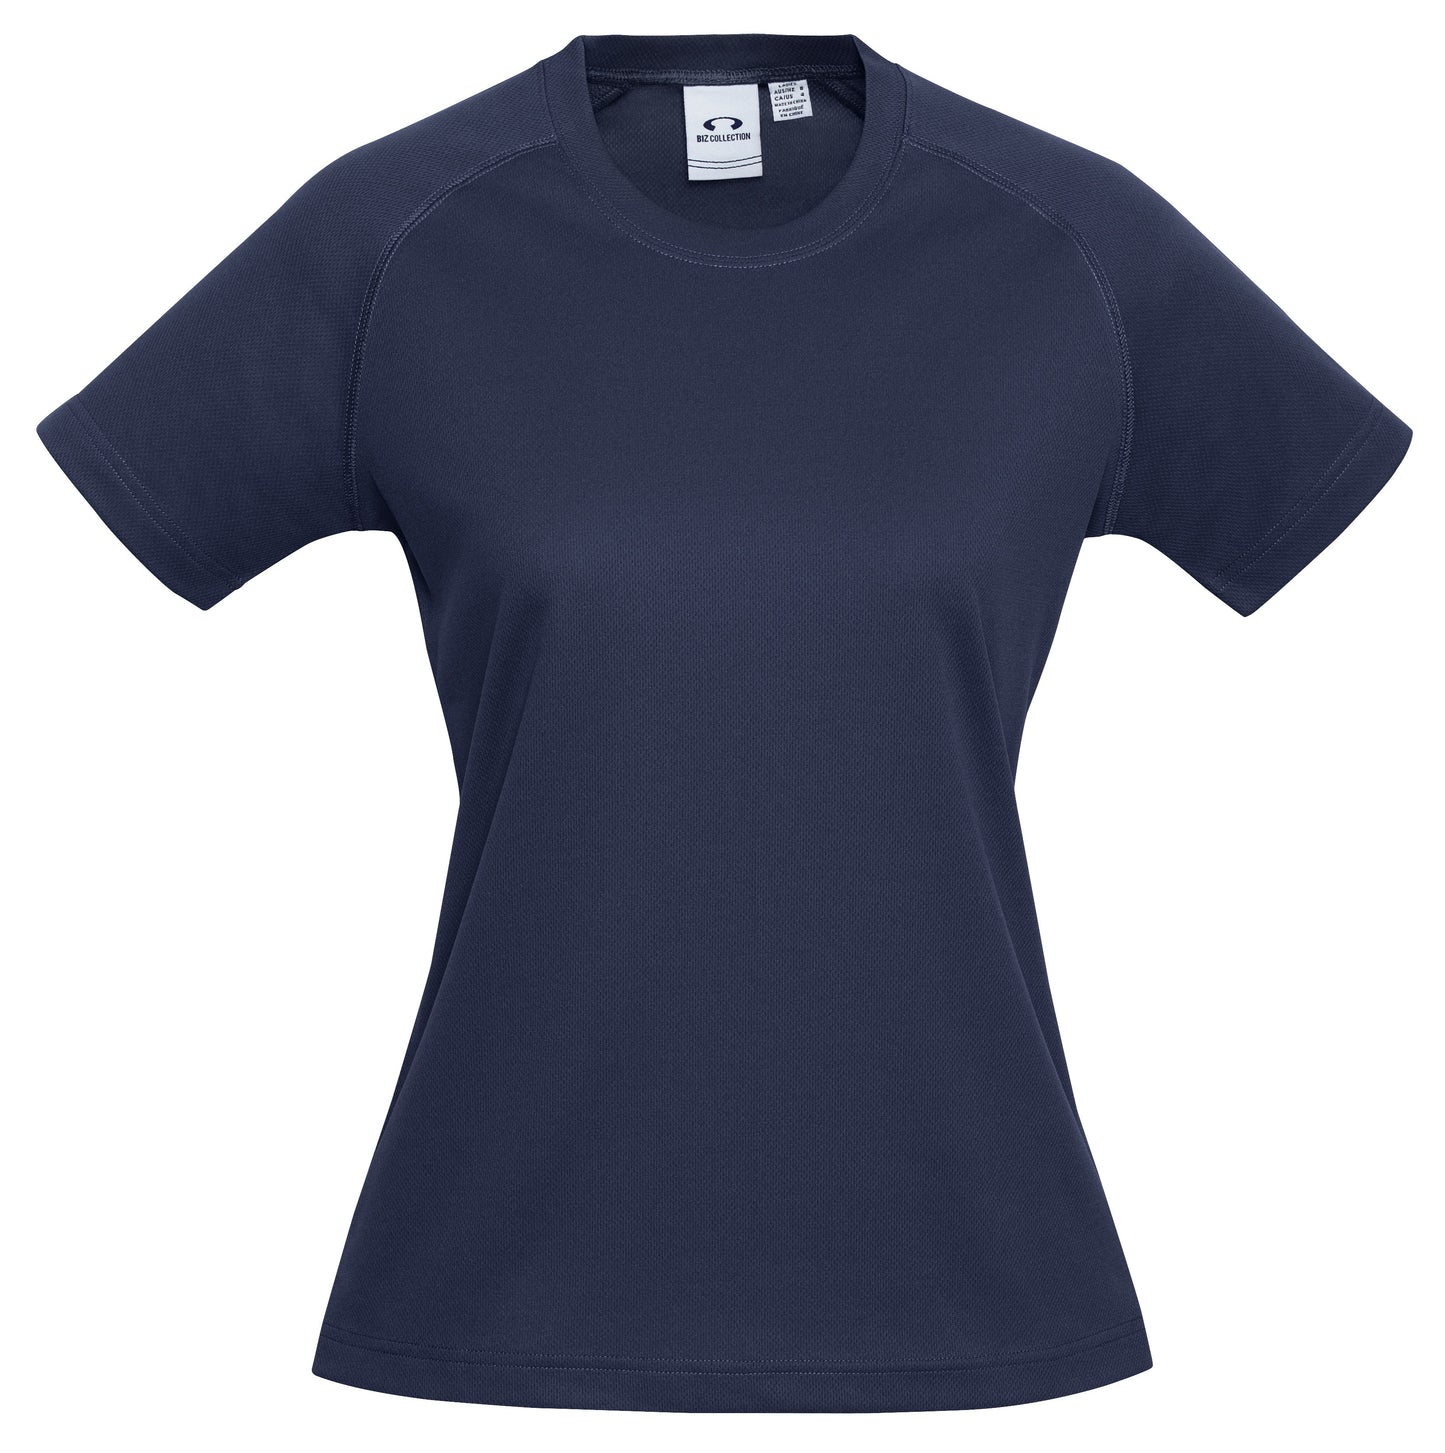 Ladies Sprint T-Shirt - Navy Only